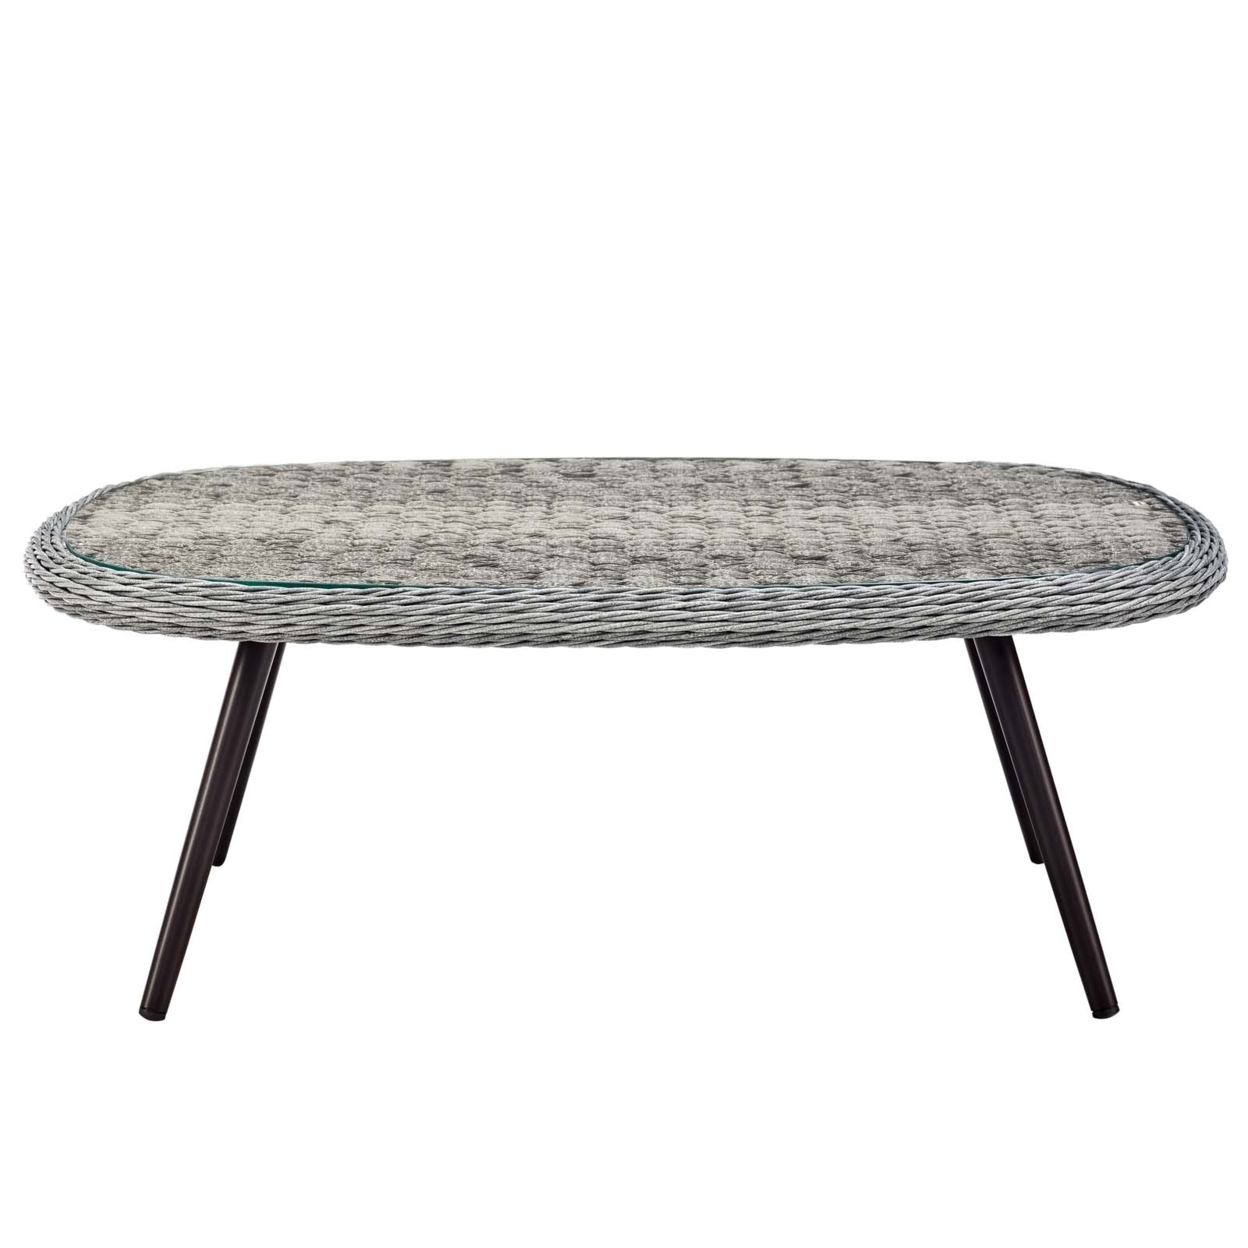 Endeavor Outdoor Patio Wicker Rattan Coffee Table (3026-GRY)